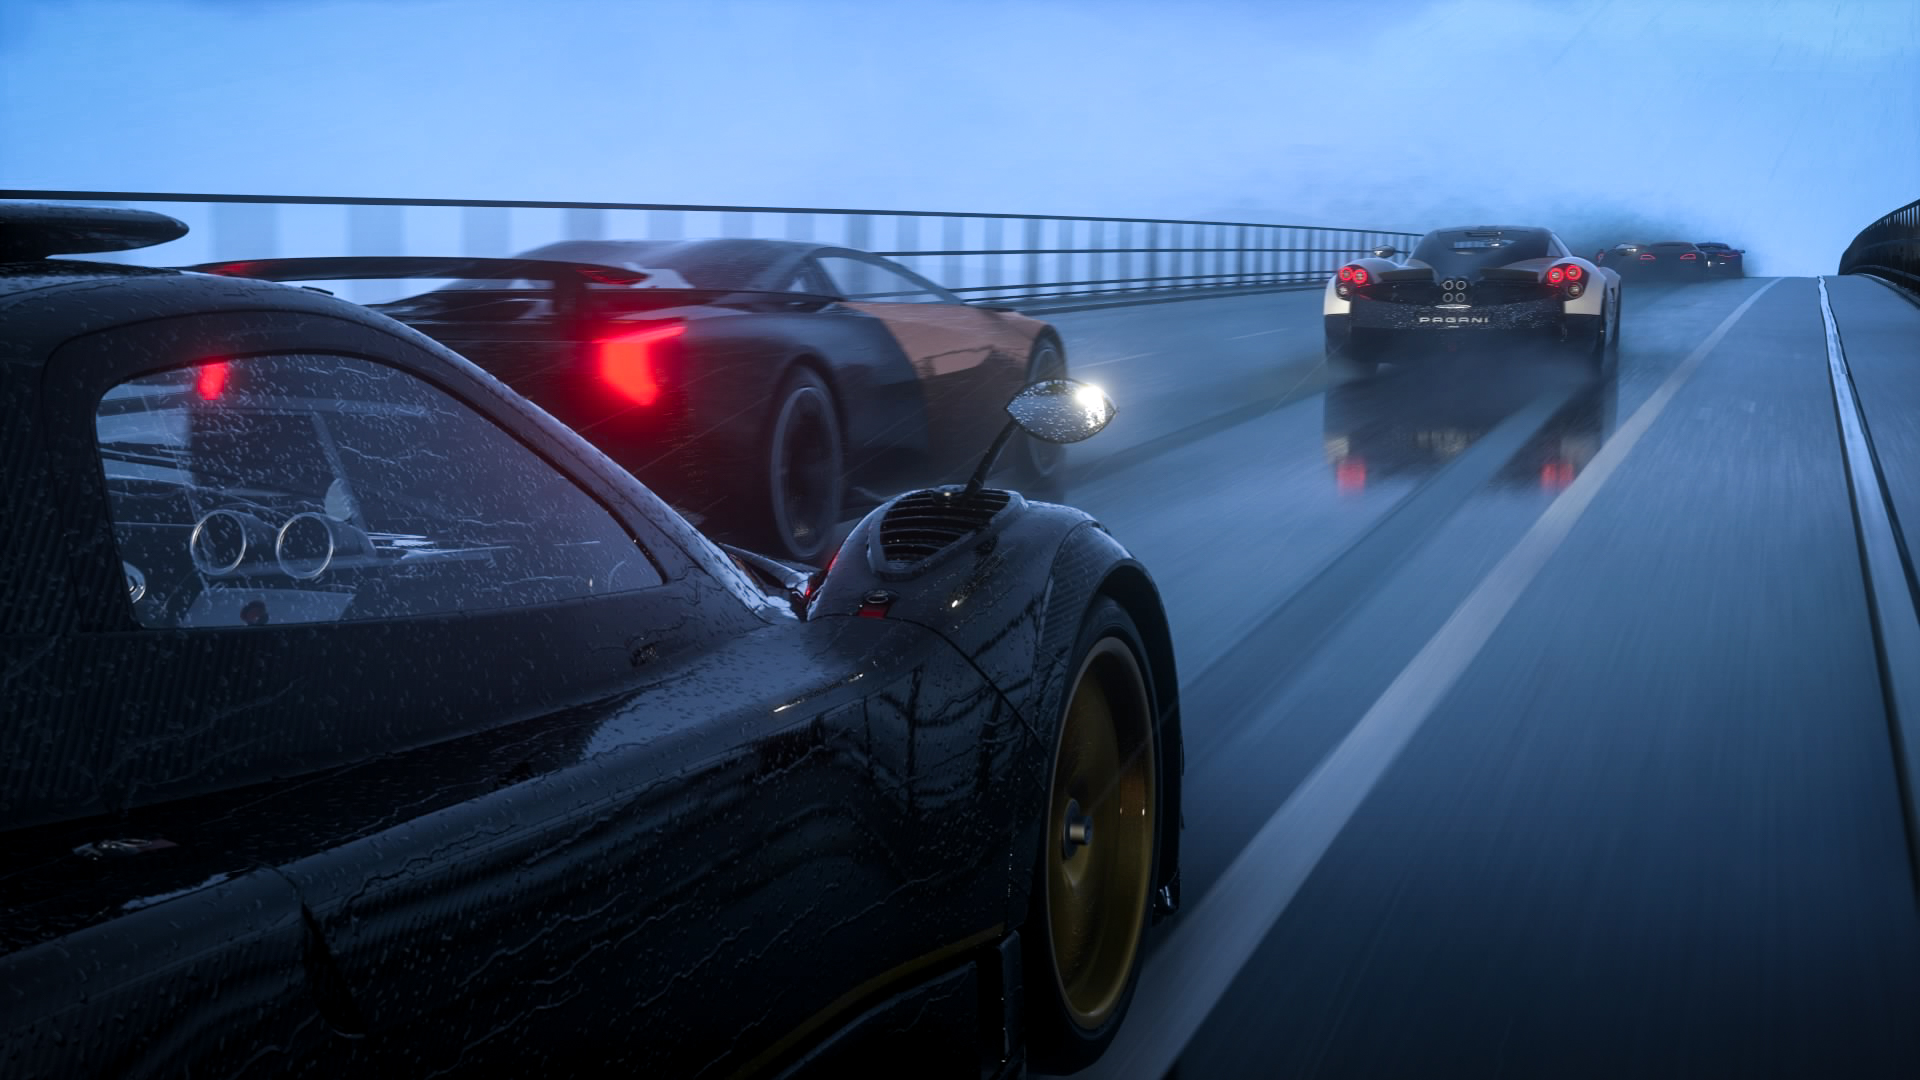 Ps4 игры гонки. DRIVECLUB Sony ps4. DRIVECLUB гонки ps4. Игра драйв клуб на ps4. DRIVECLUB Sony ps4 диск.